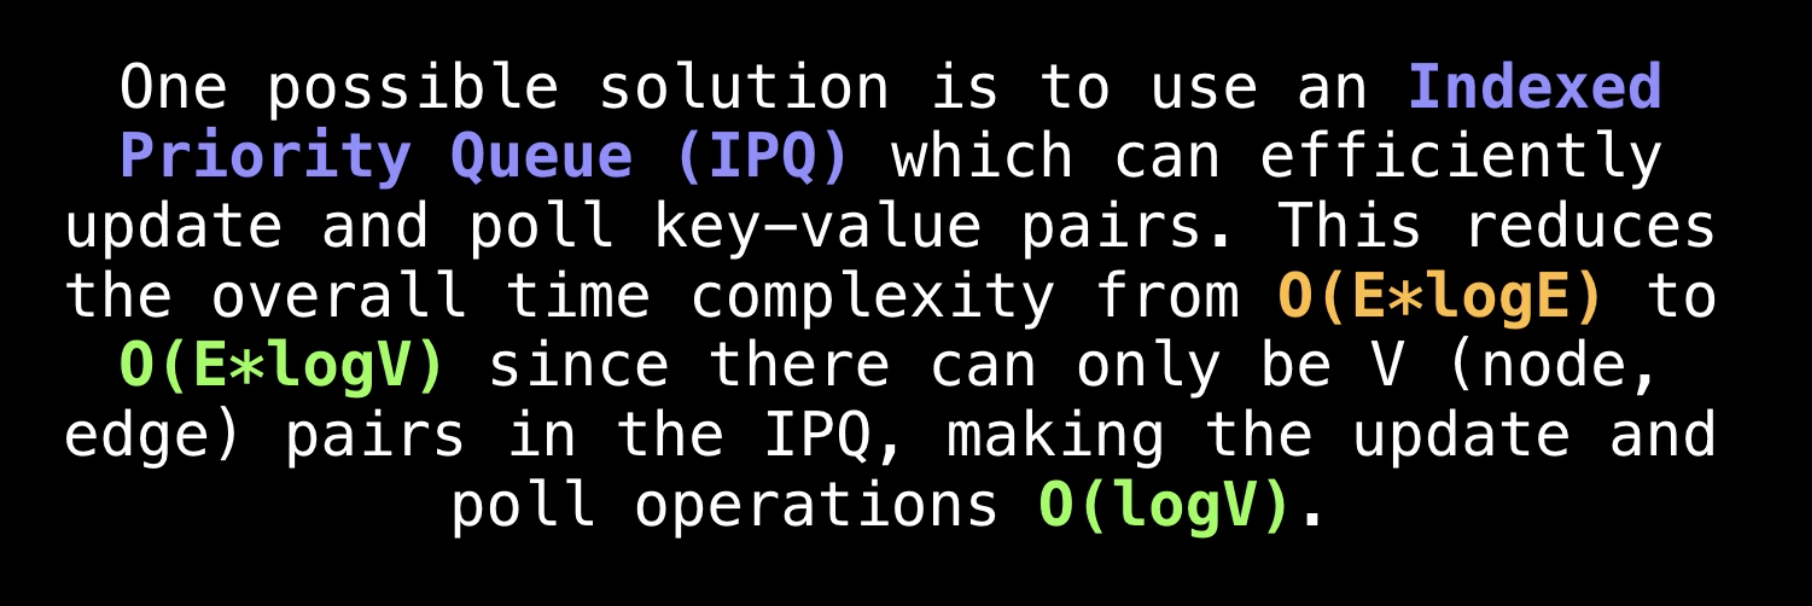 Think of an IPQ as the data structure you'd get if a hashtable and a priority queue had a baby together. It supports sorted key-value pair update and poll operations in logarithmic time.